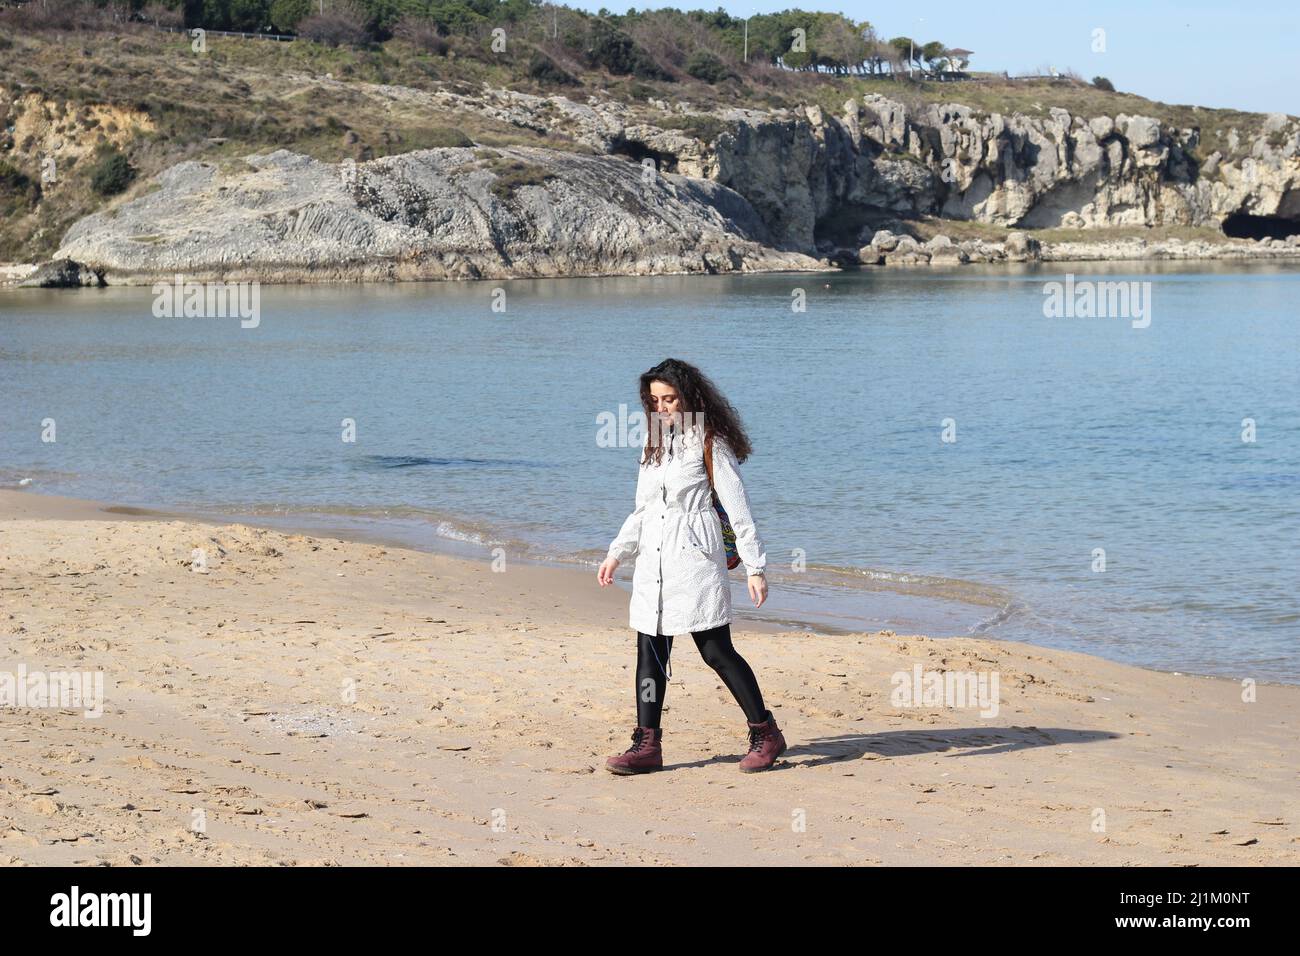 Istanbul,Turkey- February 12 2022: A beach in Sile, sunny day trip on the seaside, traveler’s aspect. Stock Photo